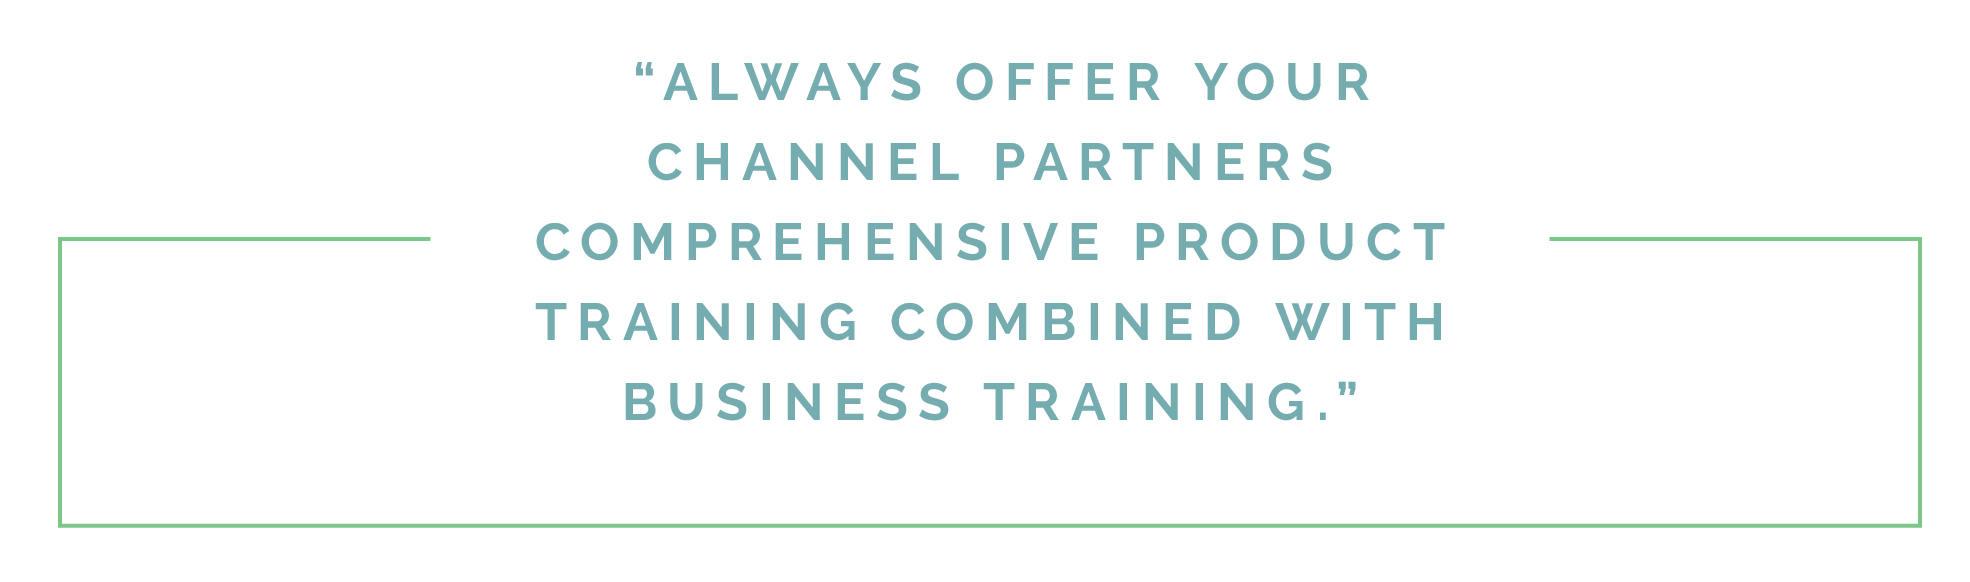 Channel partners callout quote graphic